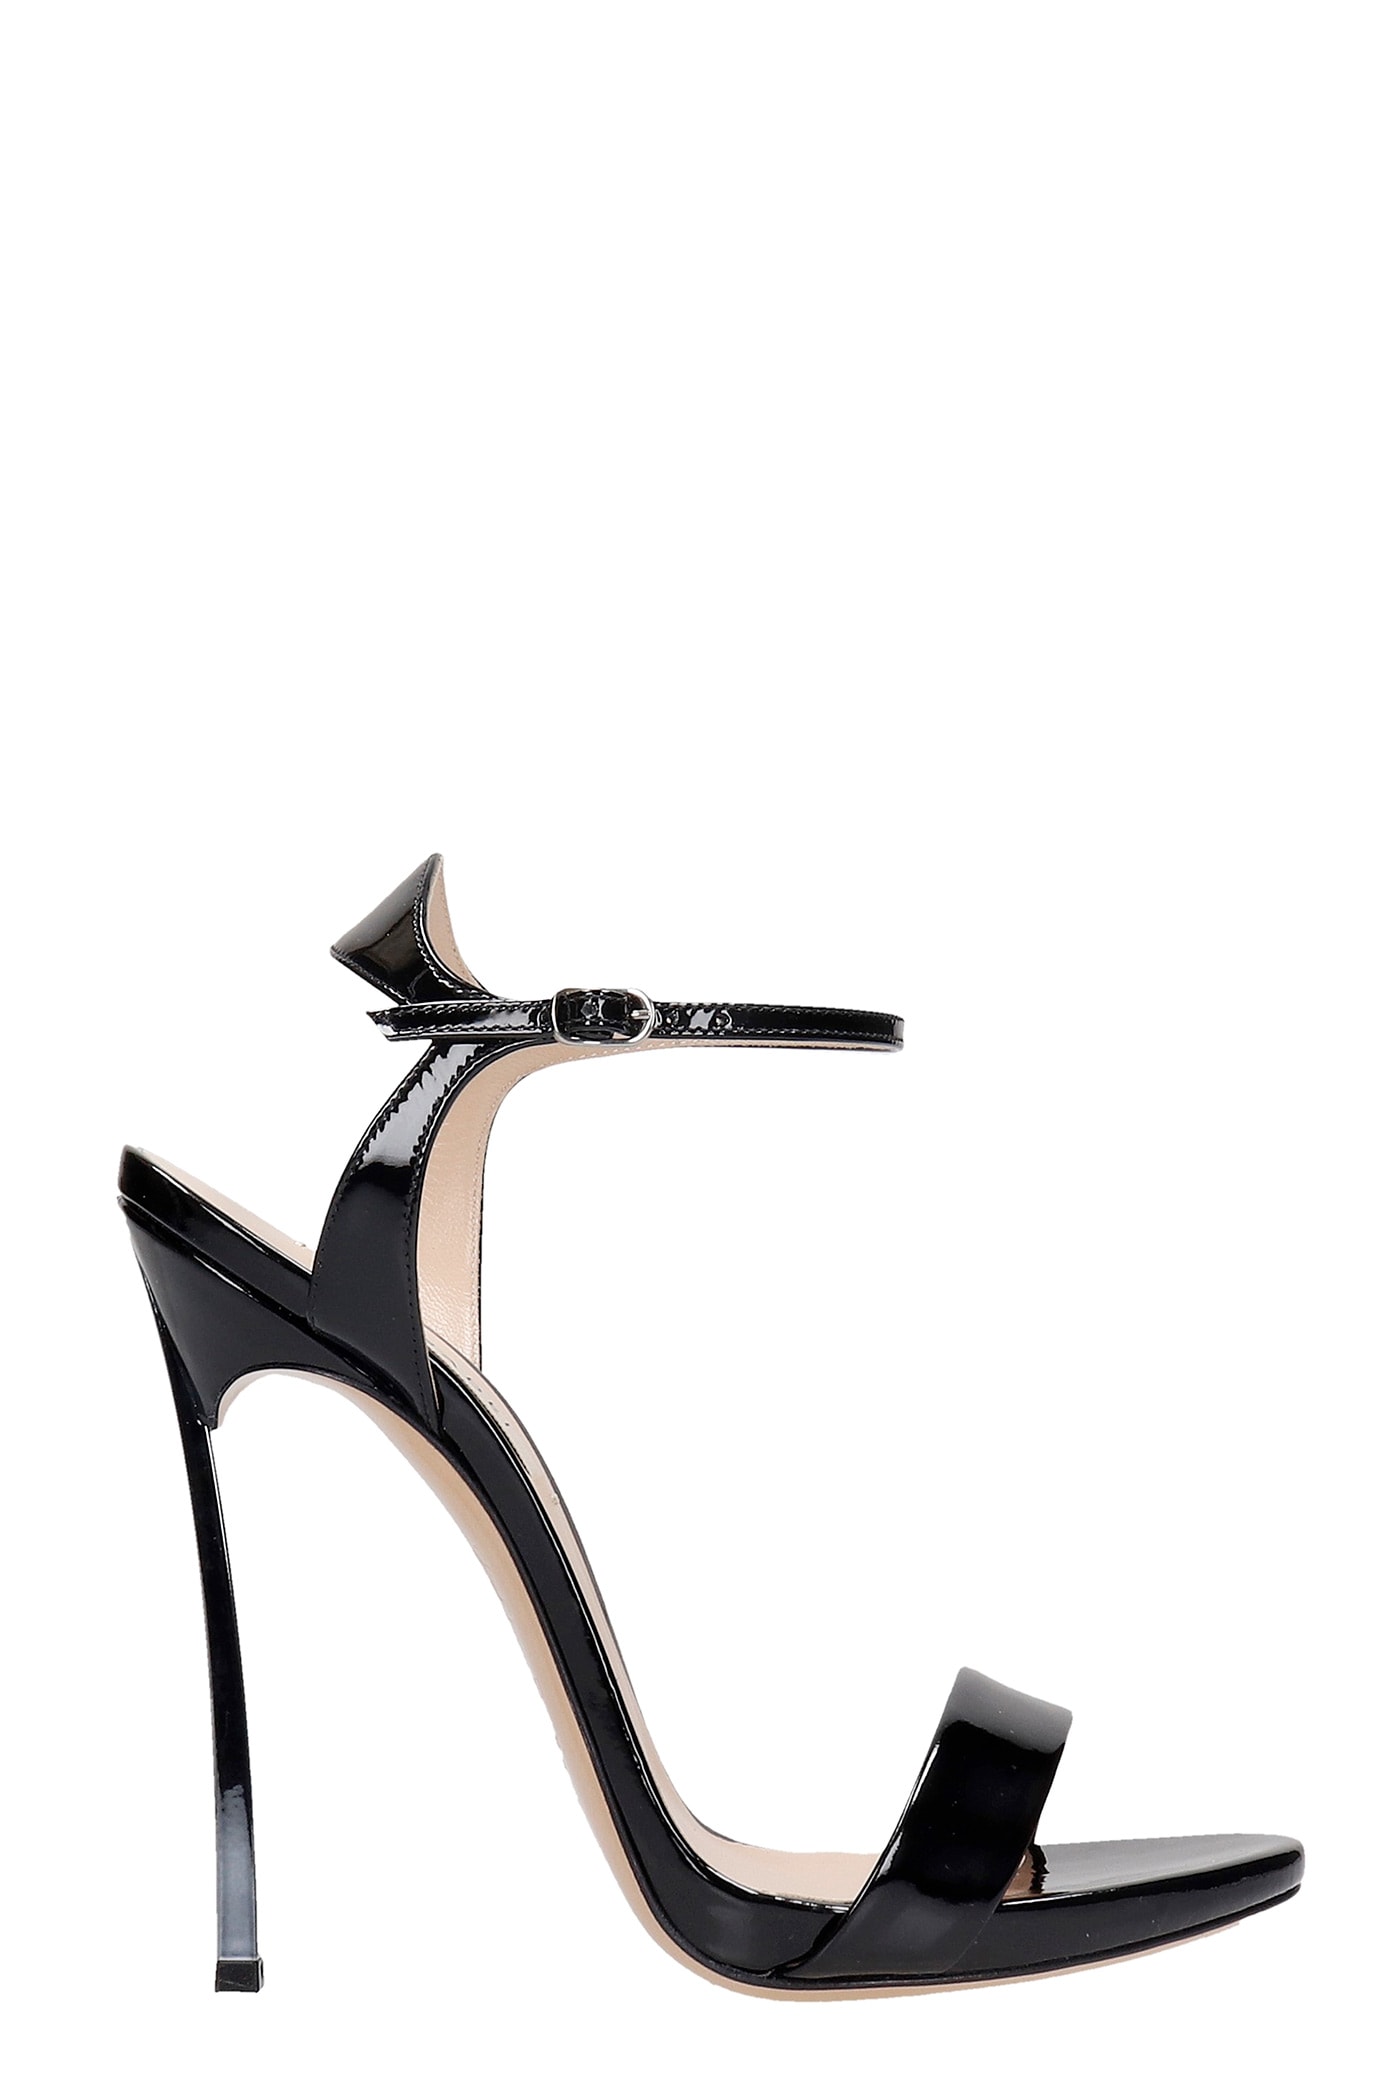 Casadei Sandals In Black Patent Leather